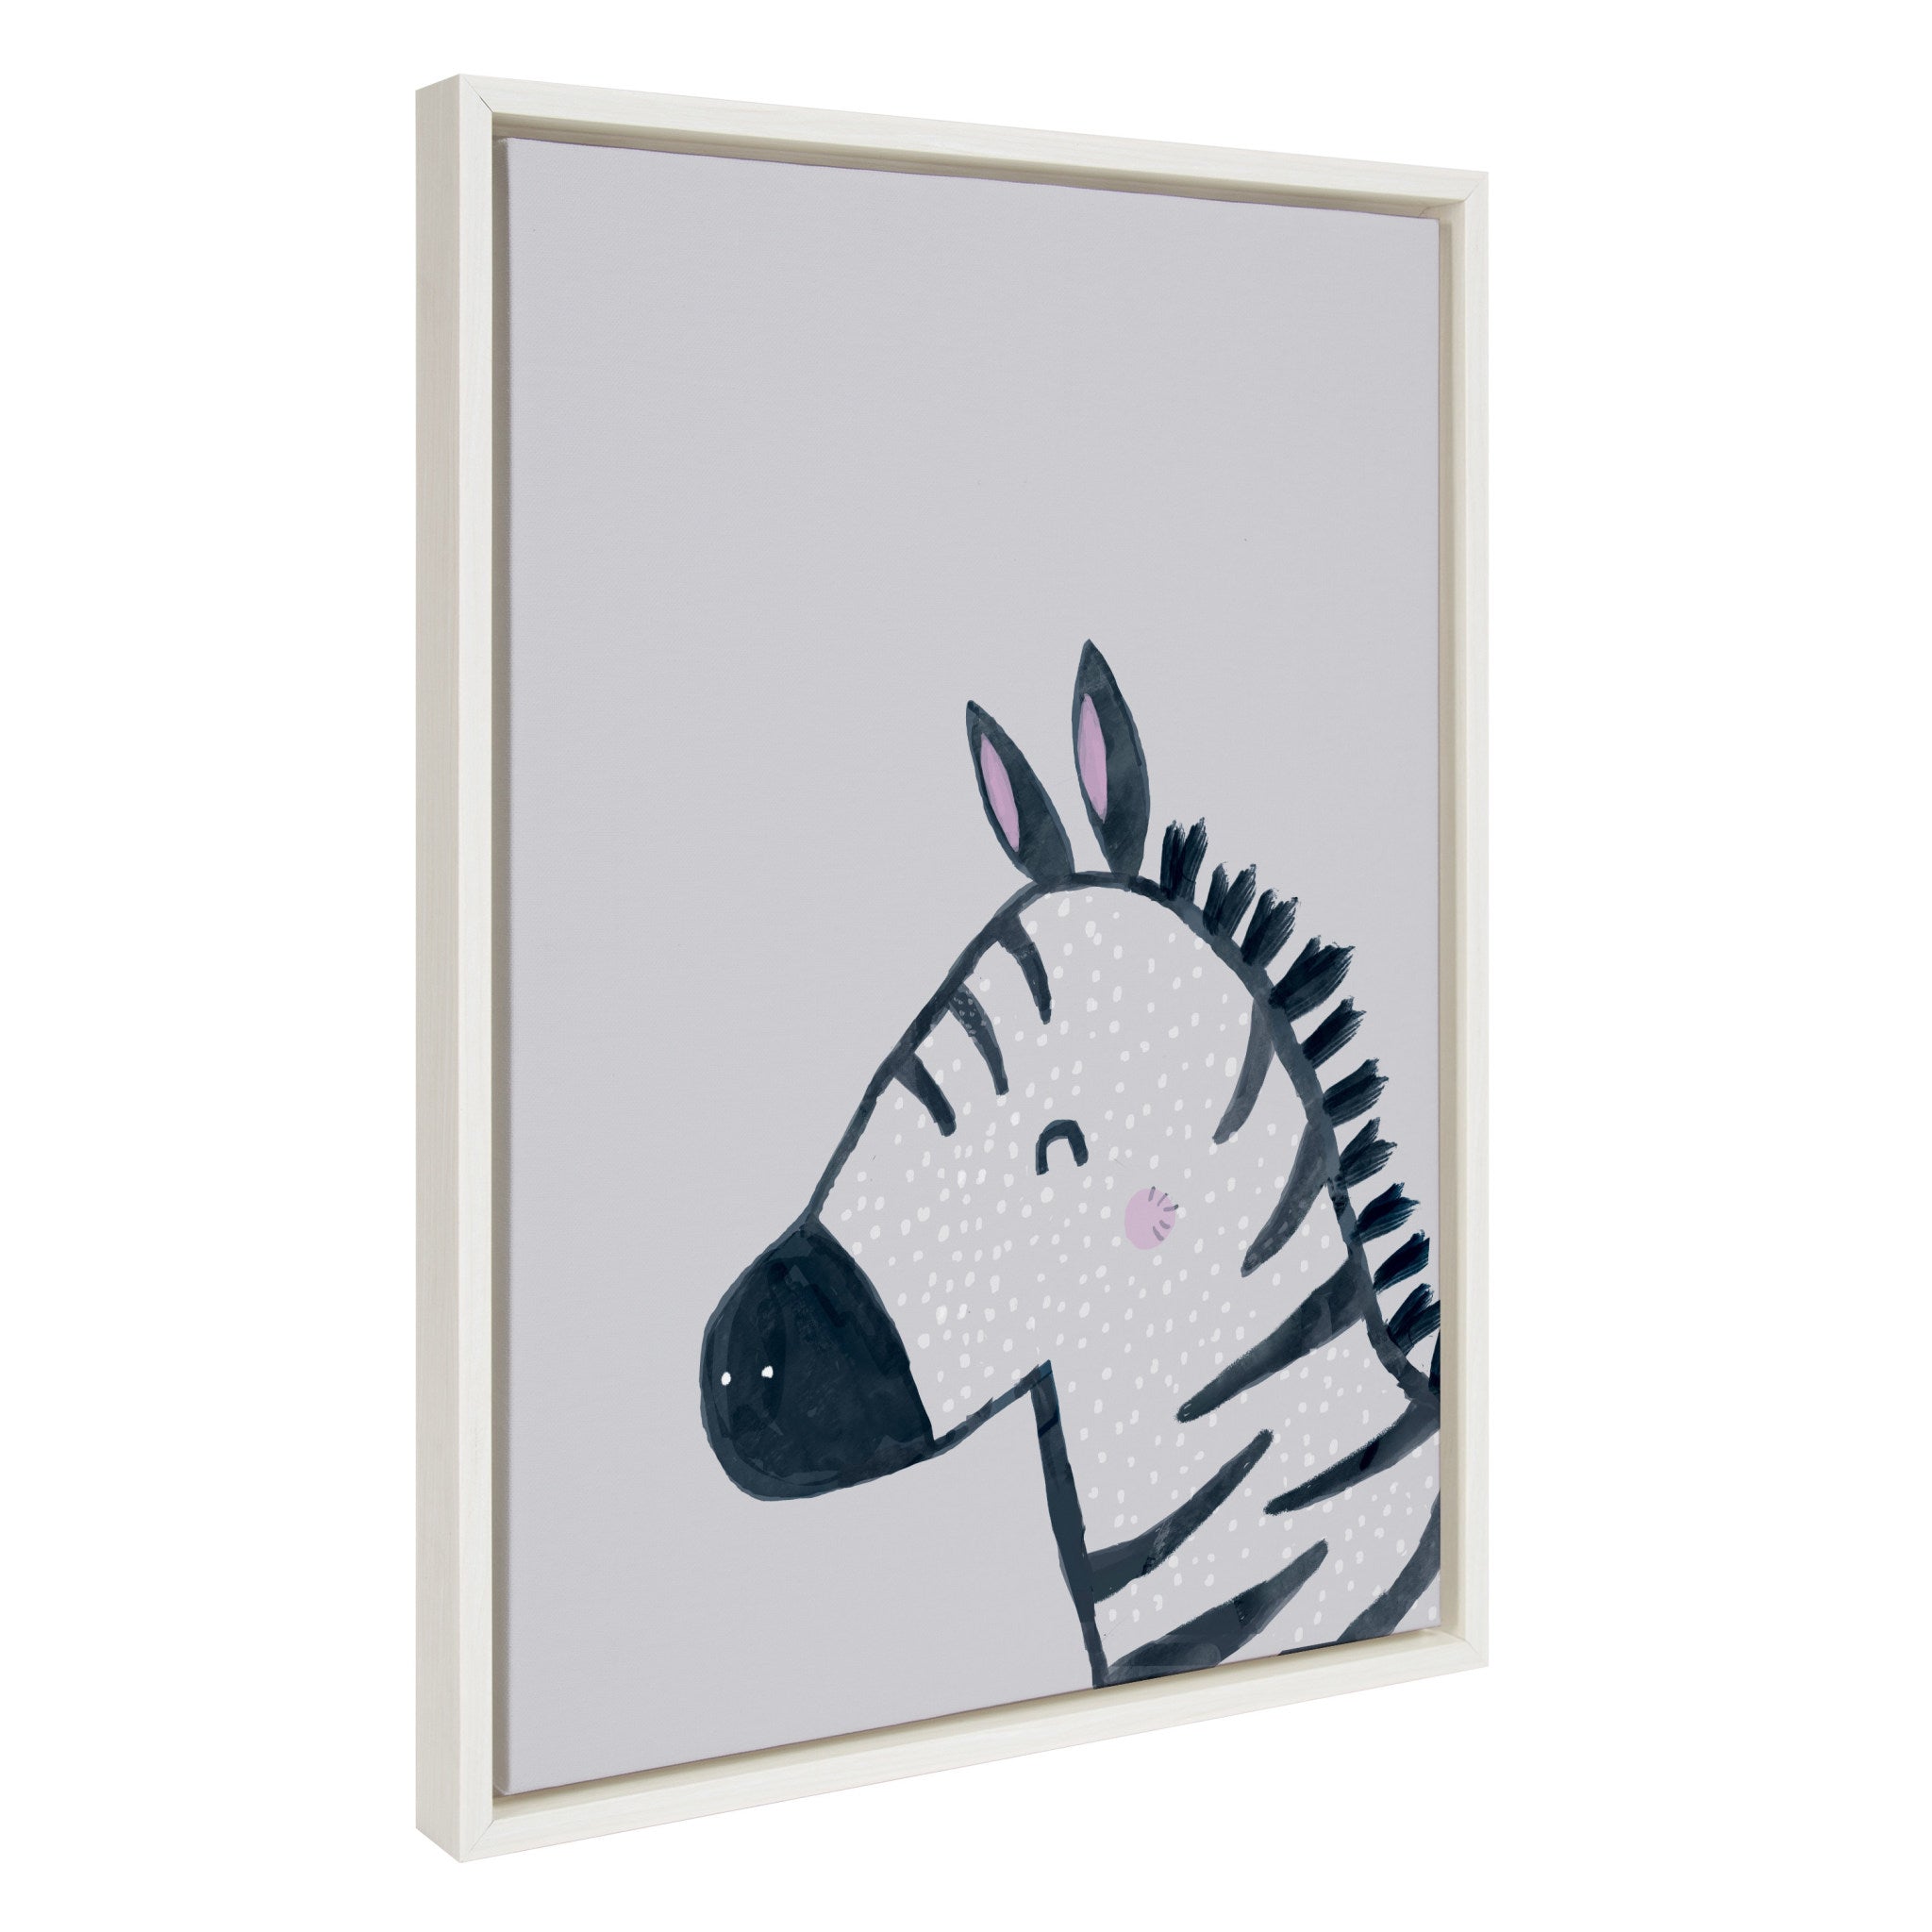 Sylvie Inky Zebra Framed Canvas by Lauradidthis